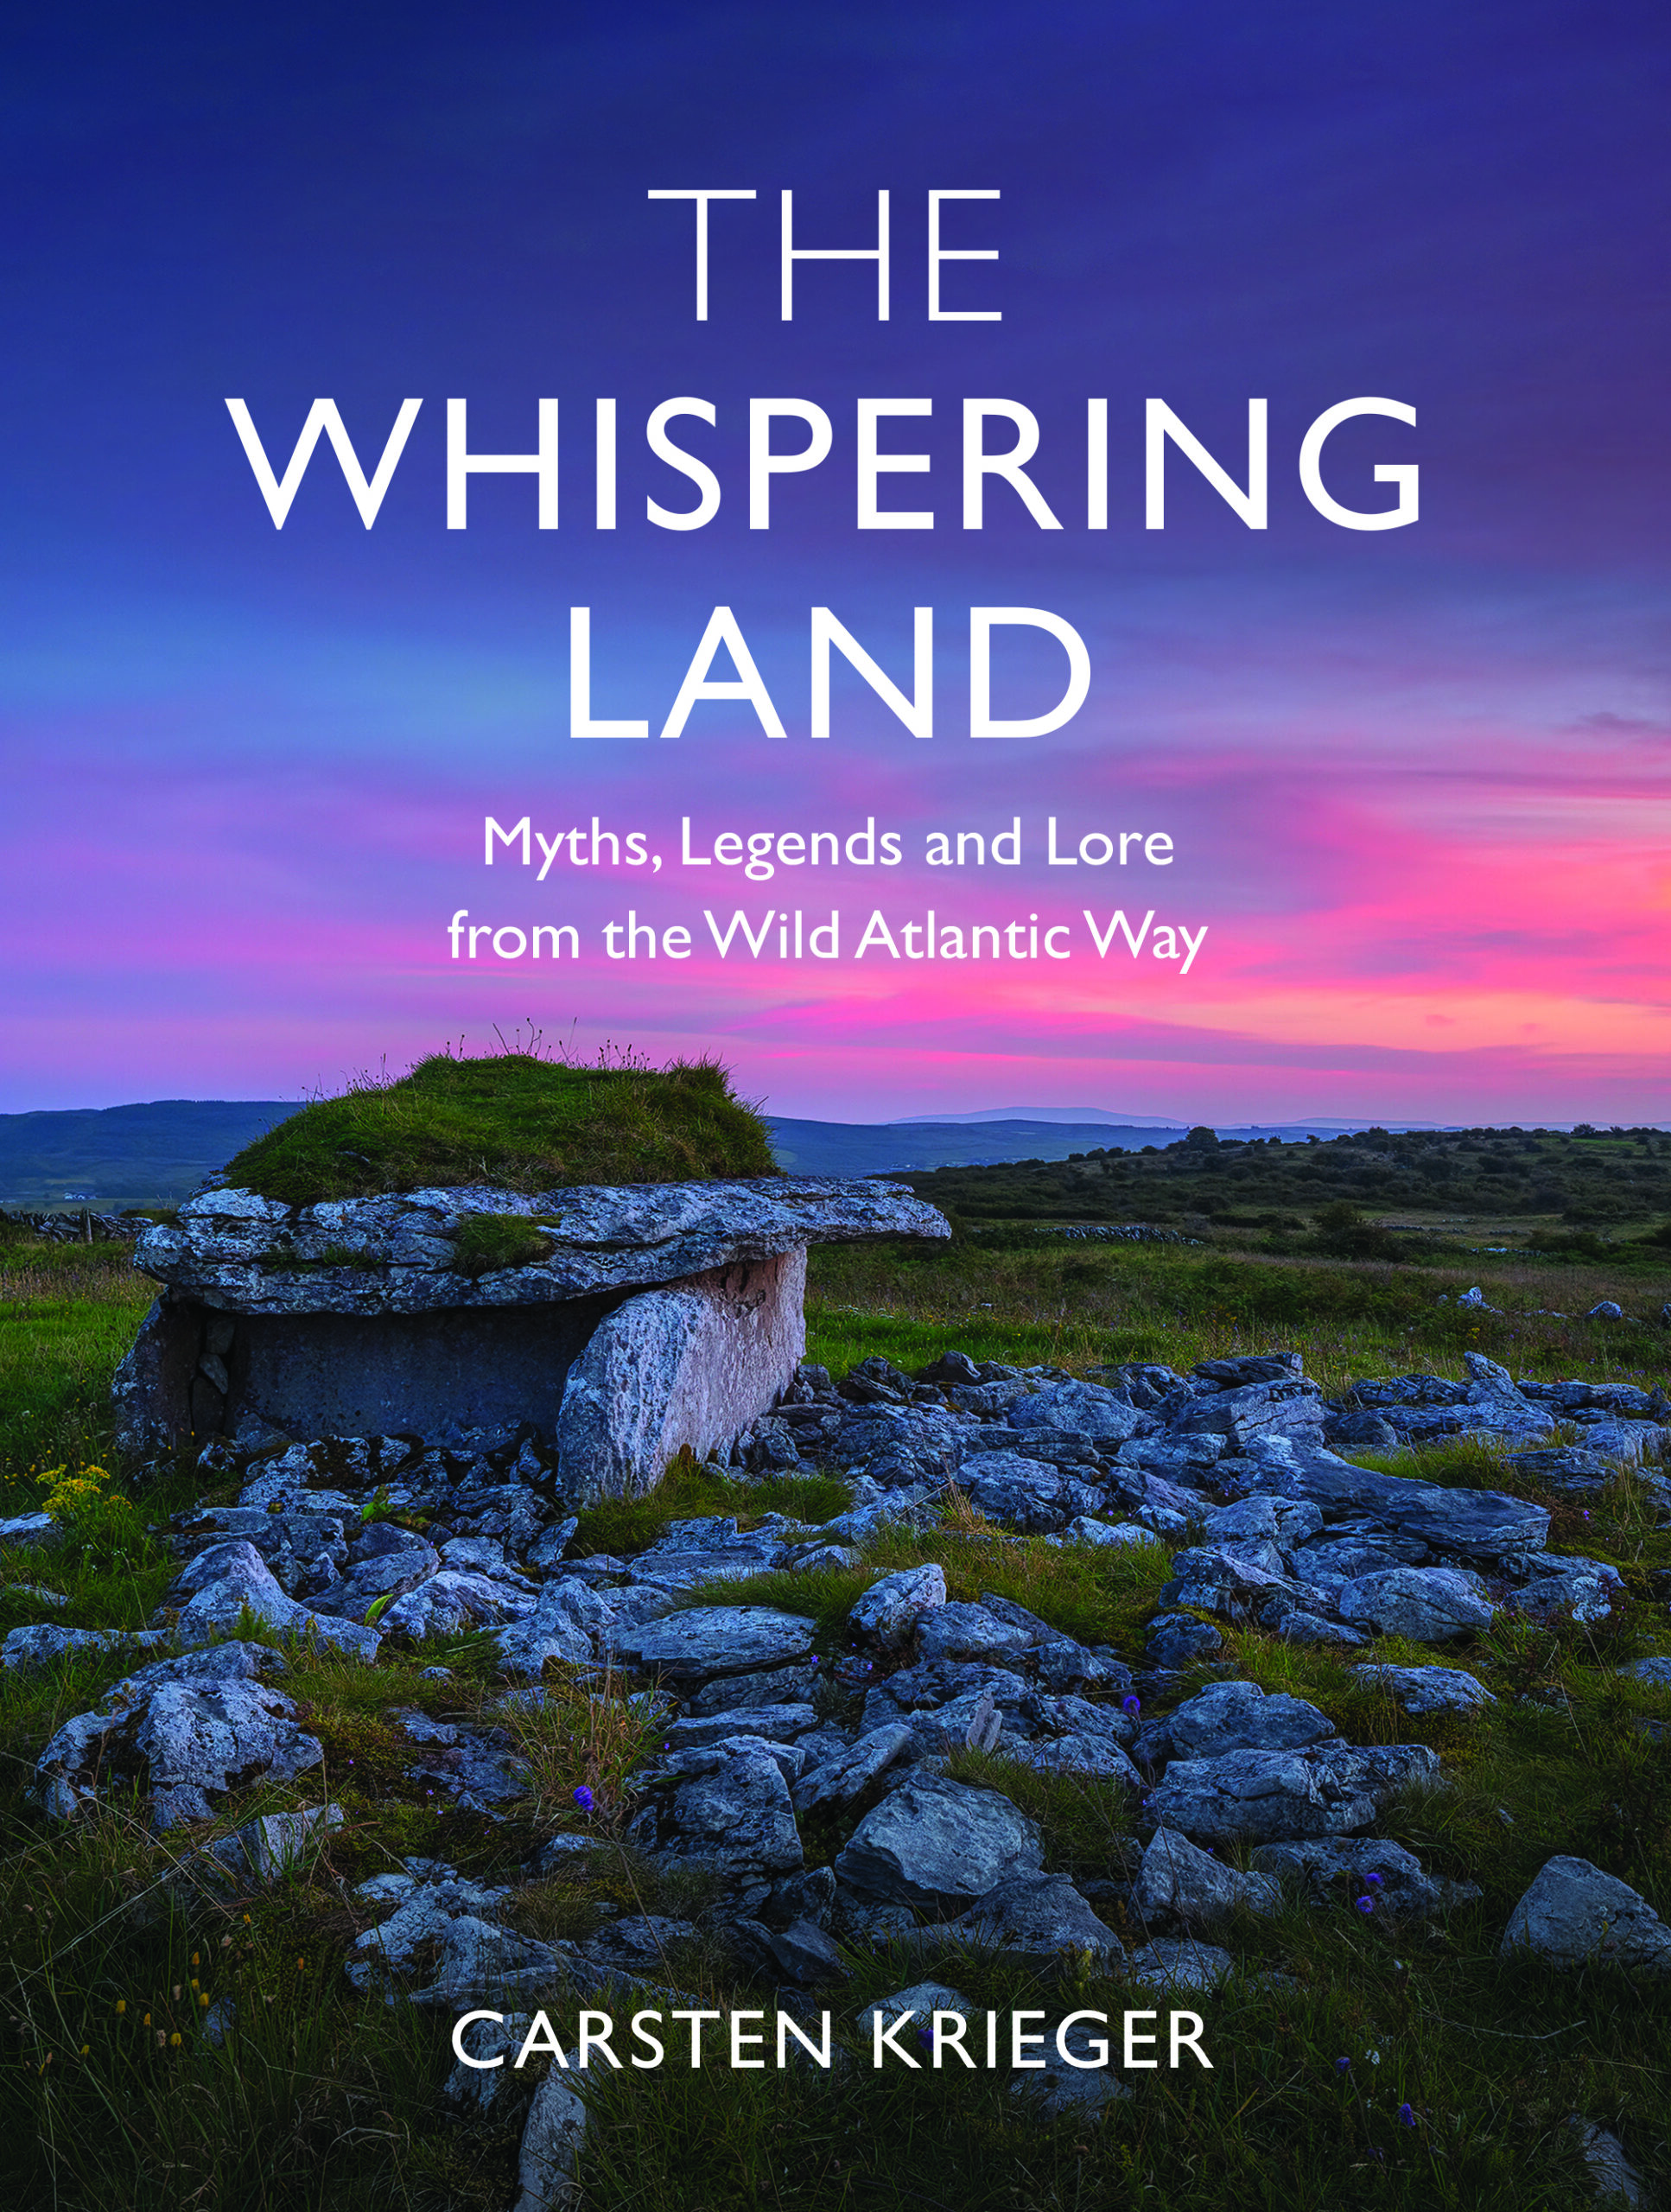 The Whispering Land by Carsten Krieger